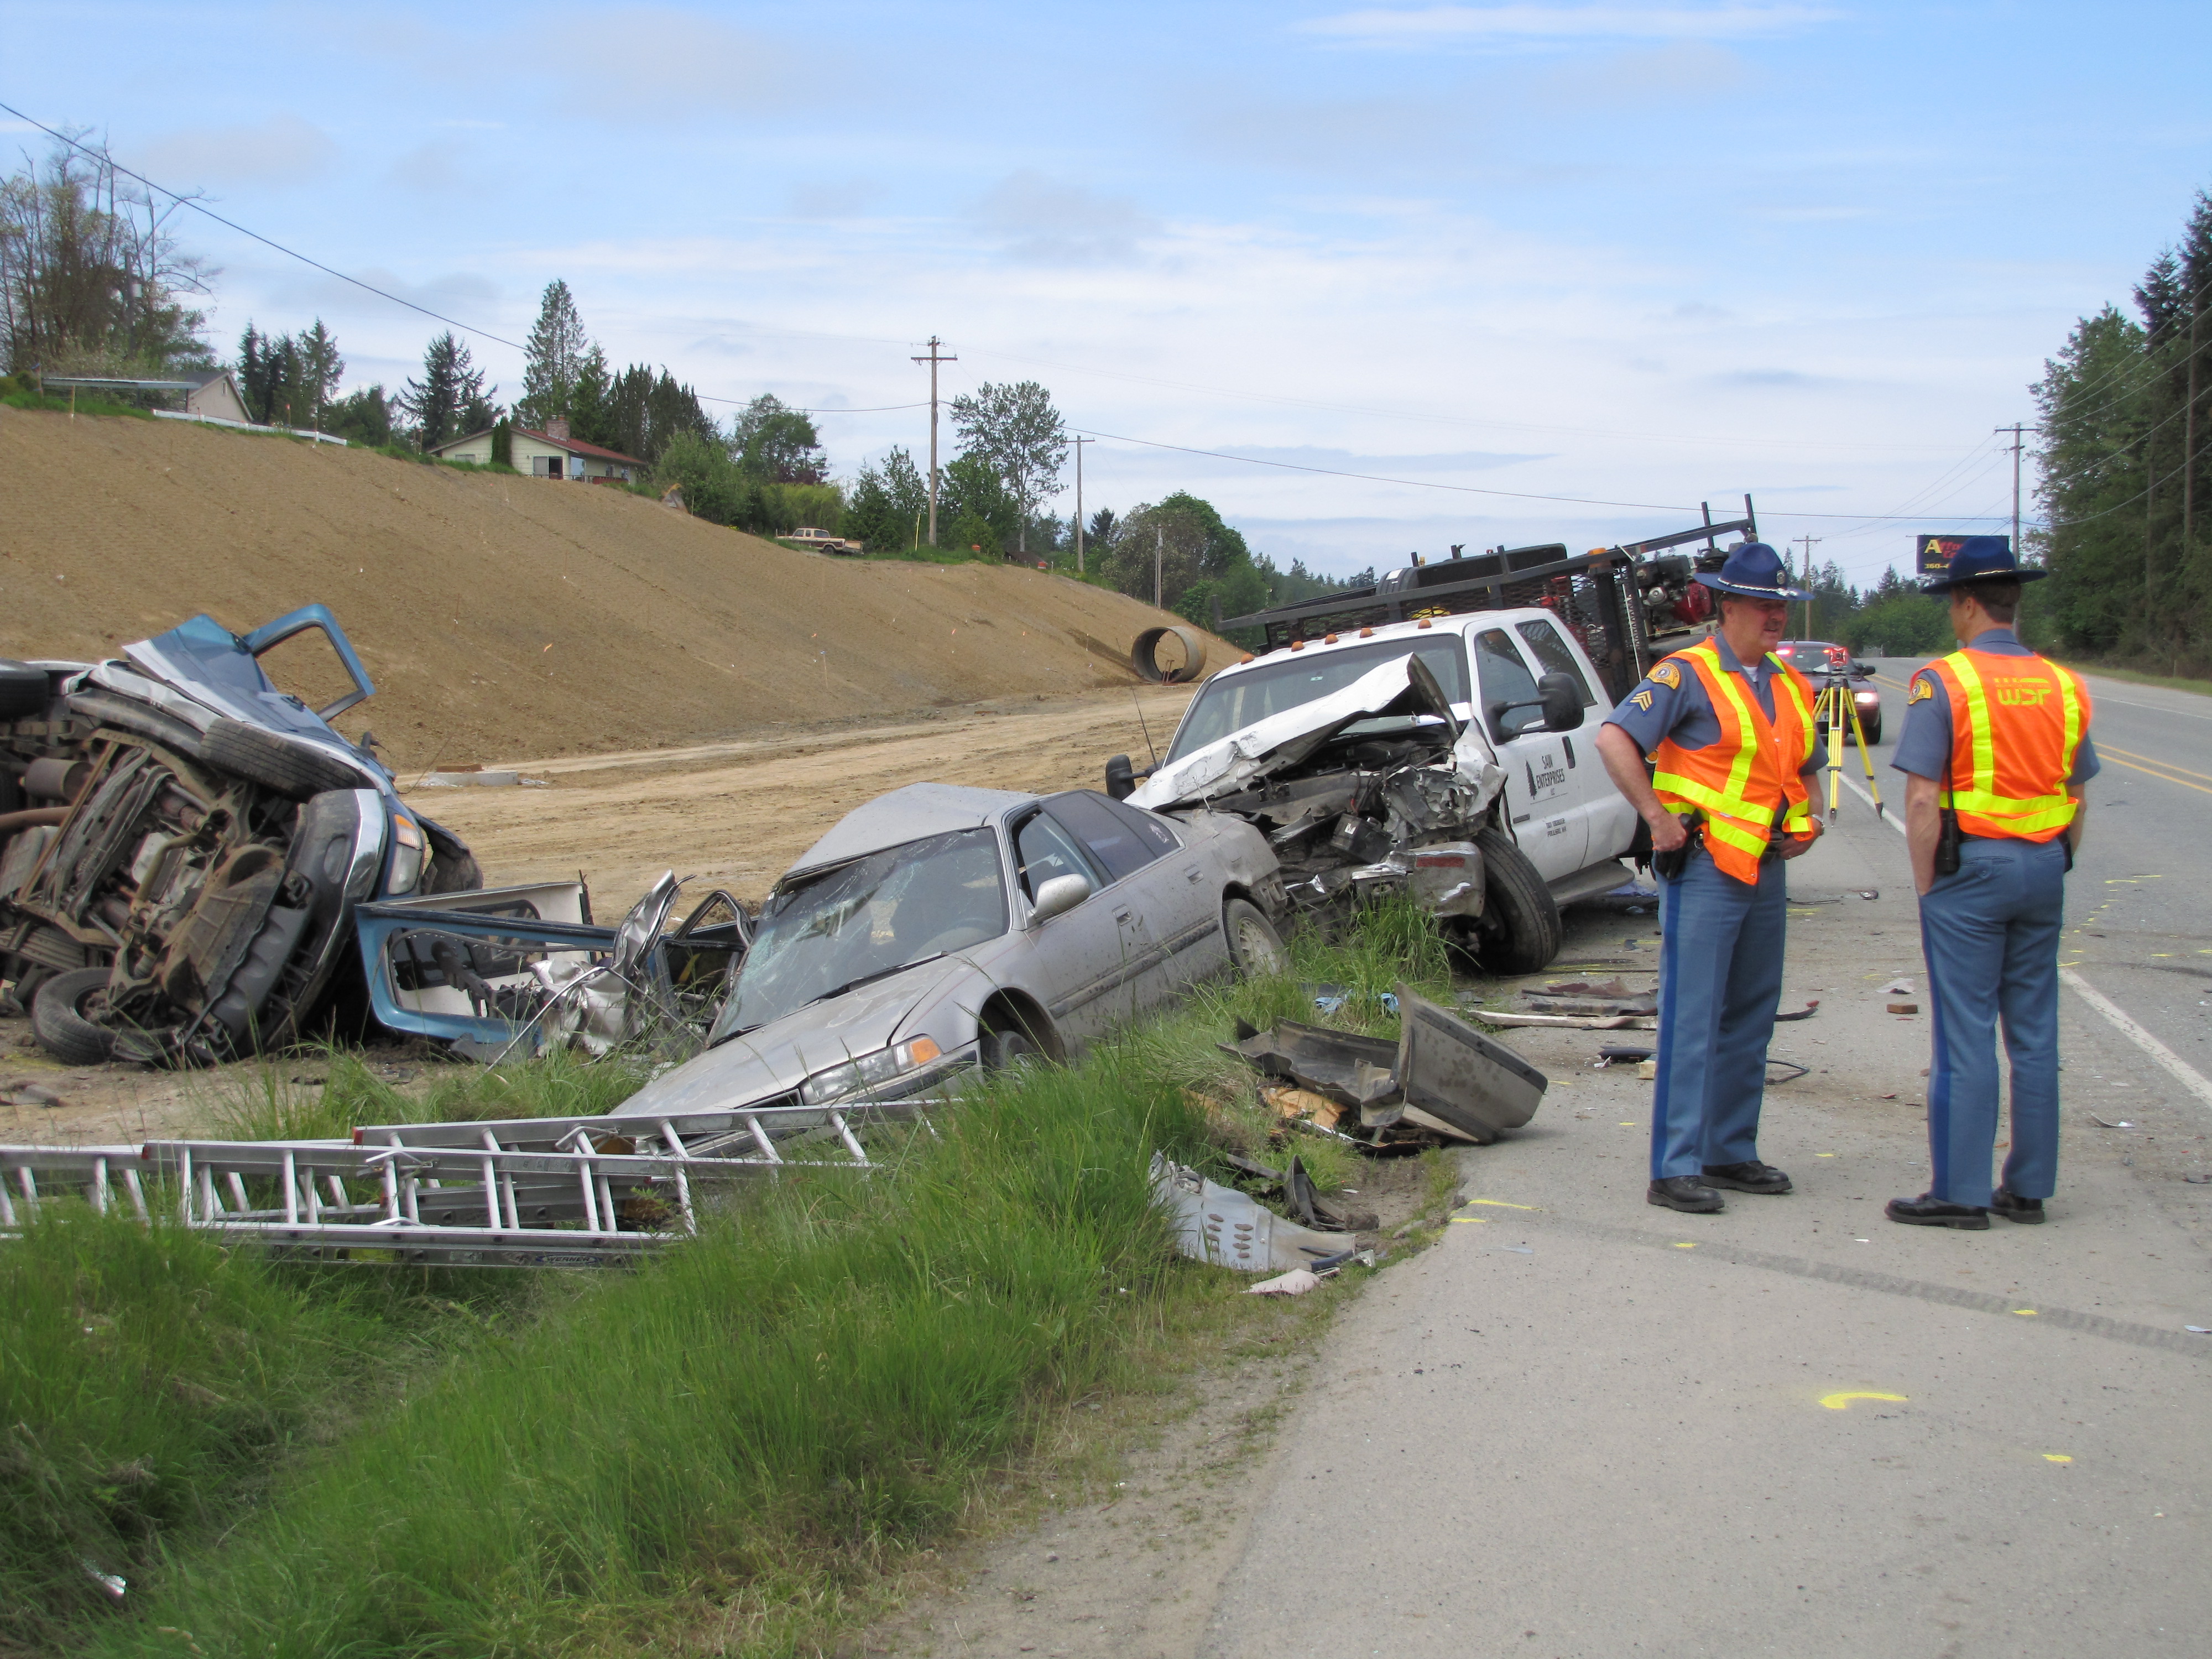 State troopers discuss the scene in which two trucks and a car collided on U.S. Highway 101 between Port Angeles and Sequim this morning. Arwyn Rice/Peninsula Daily News